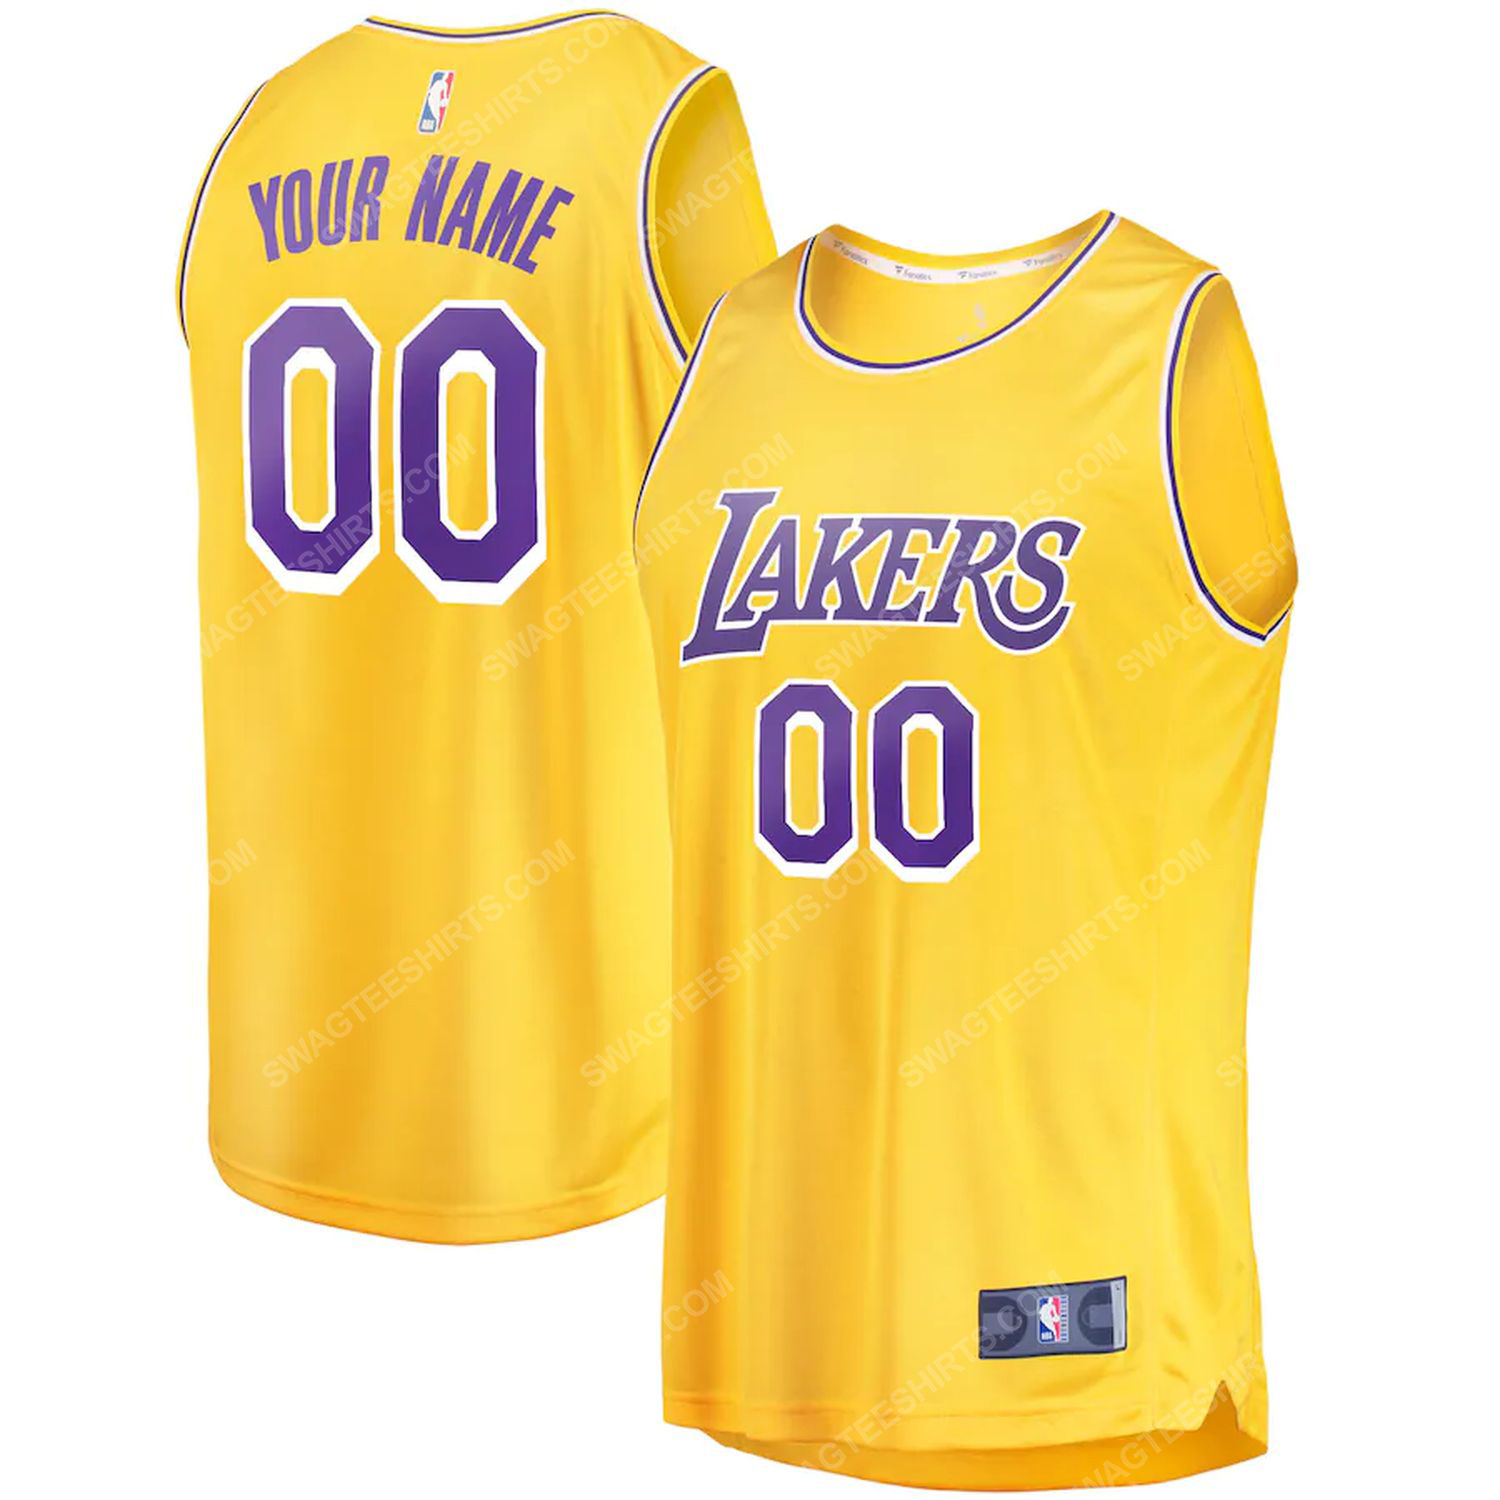 Custom nba los angeles lakers team basketball jersey-gold-icon edition - Copy